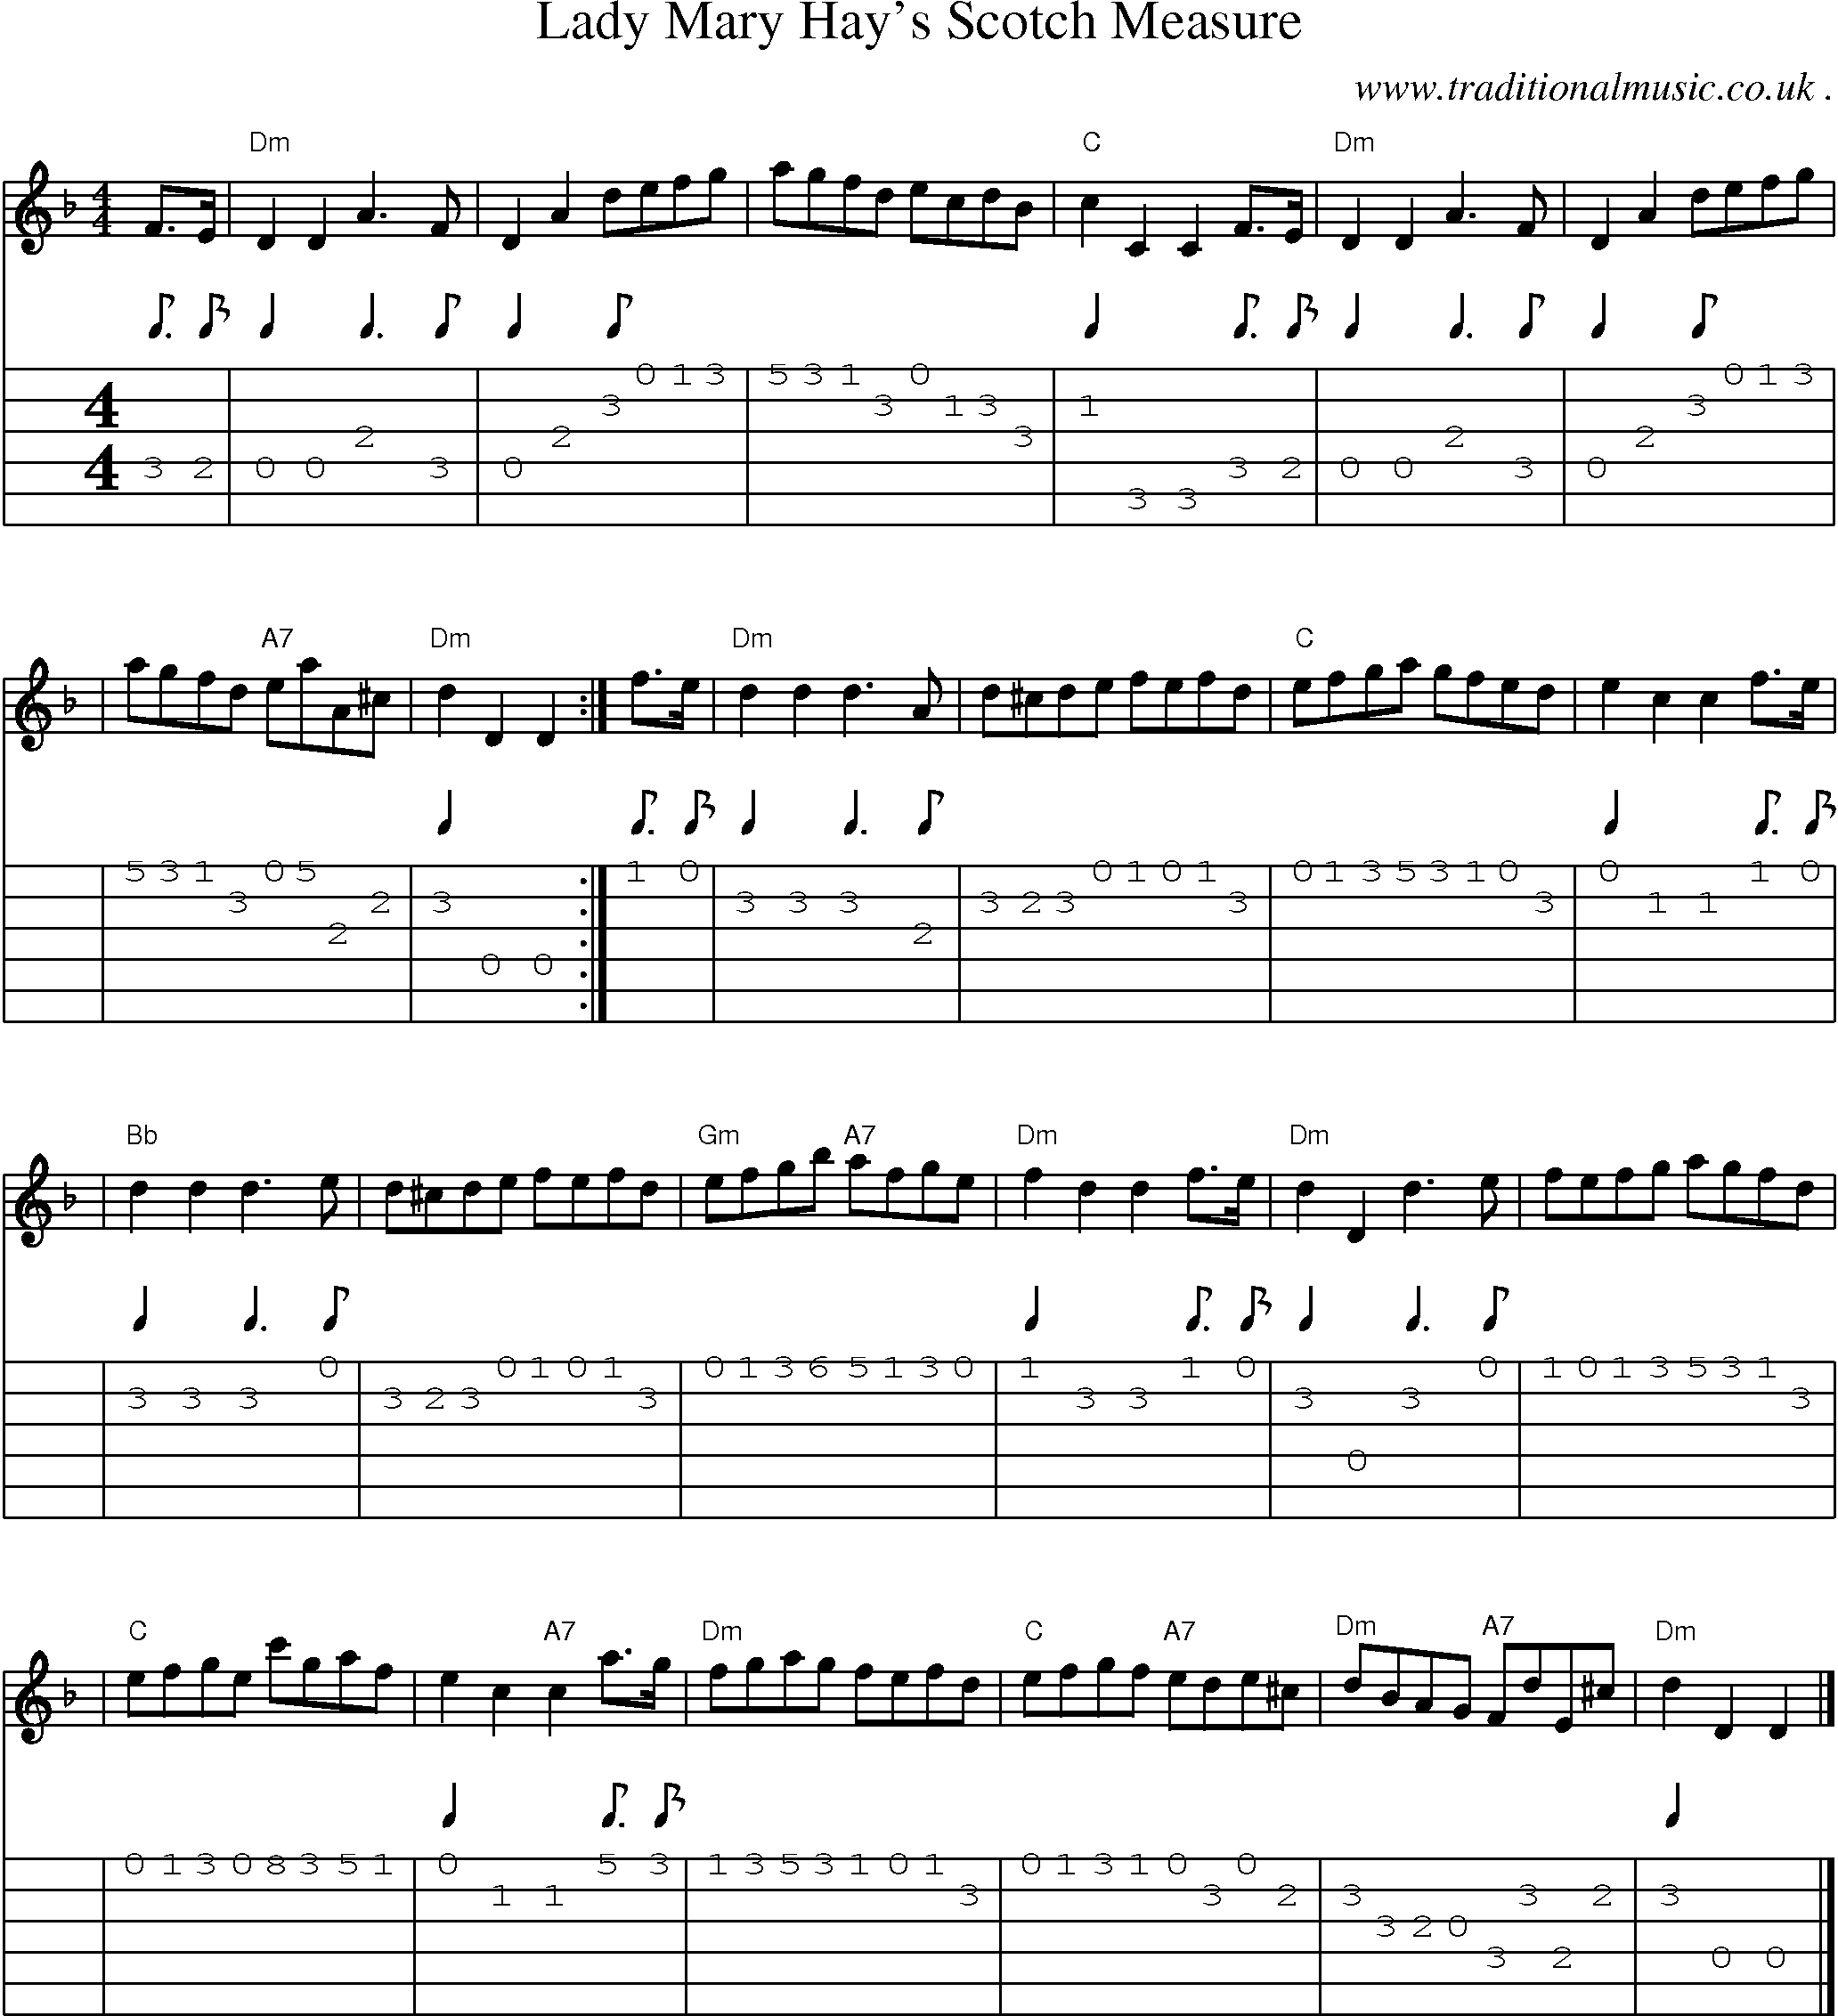 Sheet-music  score, Chords and Guitar Tabs for Lady Mary Hays Scotch Measure